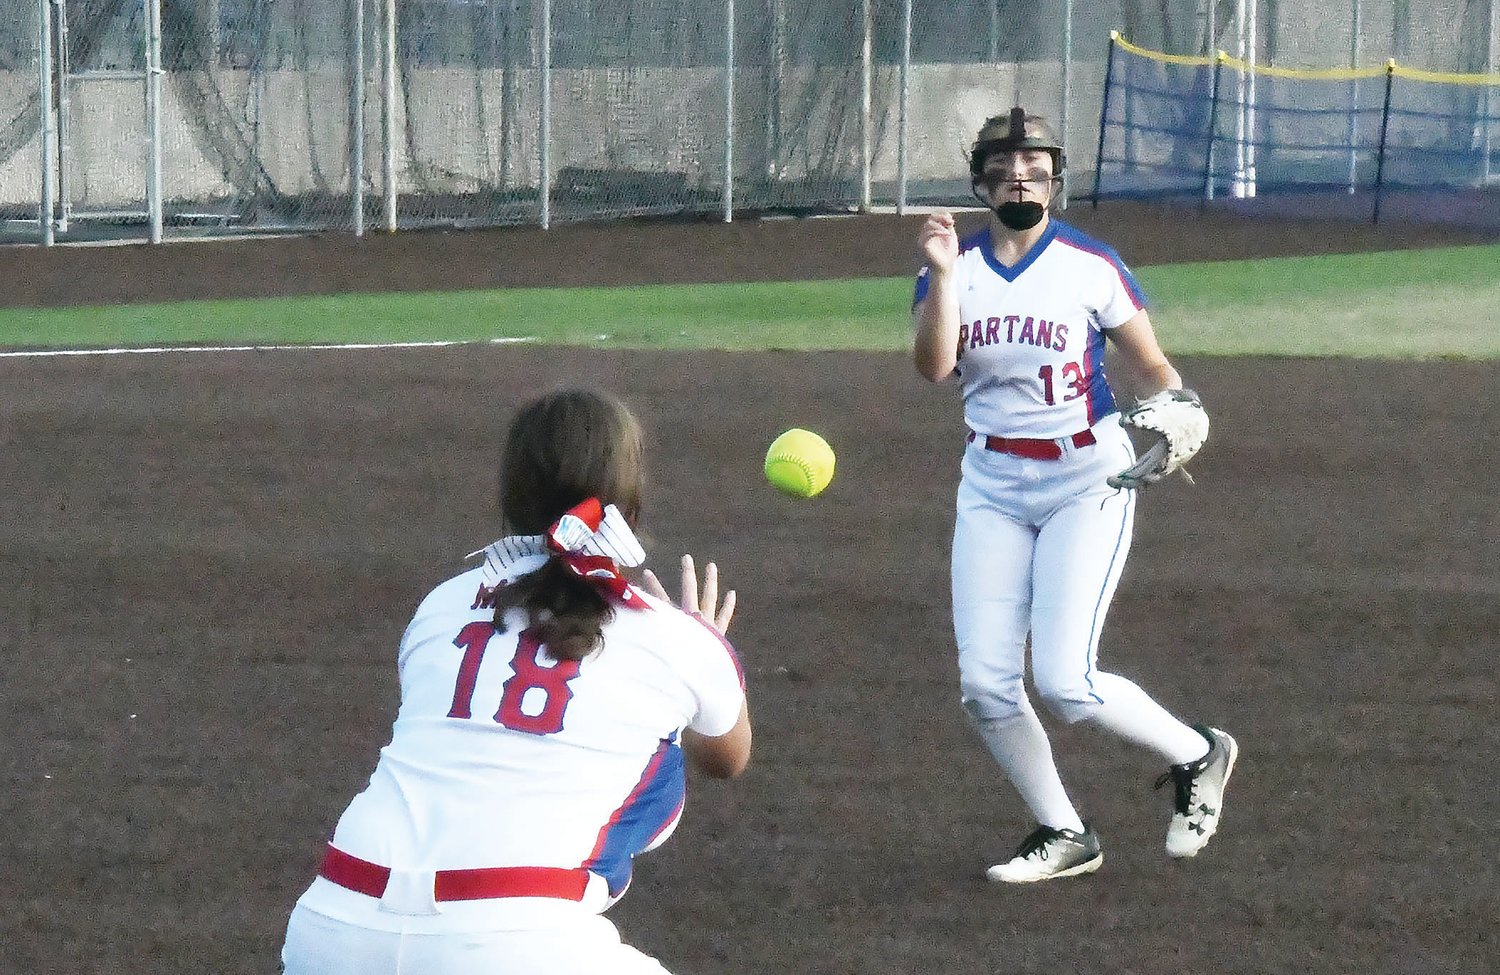 Moberly High School second baseman Elizabeth Reisenauer (13) tosses the ball to Jade Mickle (18) for a putout during Tuesday’s North Central Missouri Conference game against Hannibal. The Spartans downed the Pirates, 7-3, for their first win of the season.